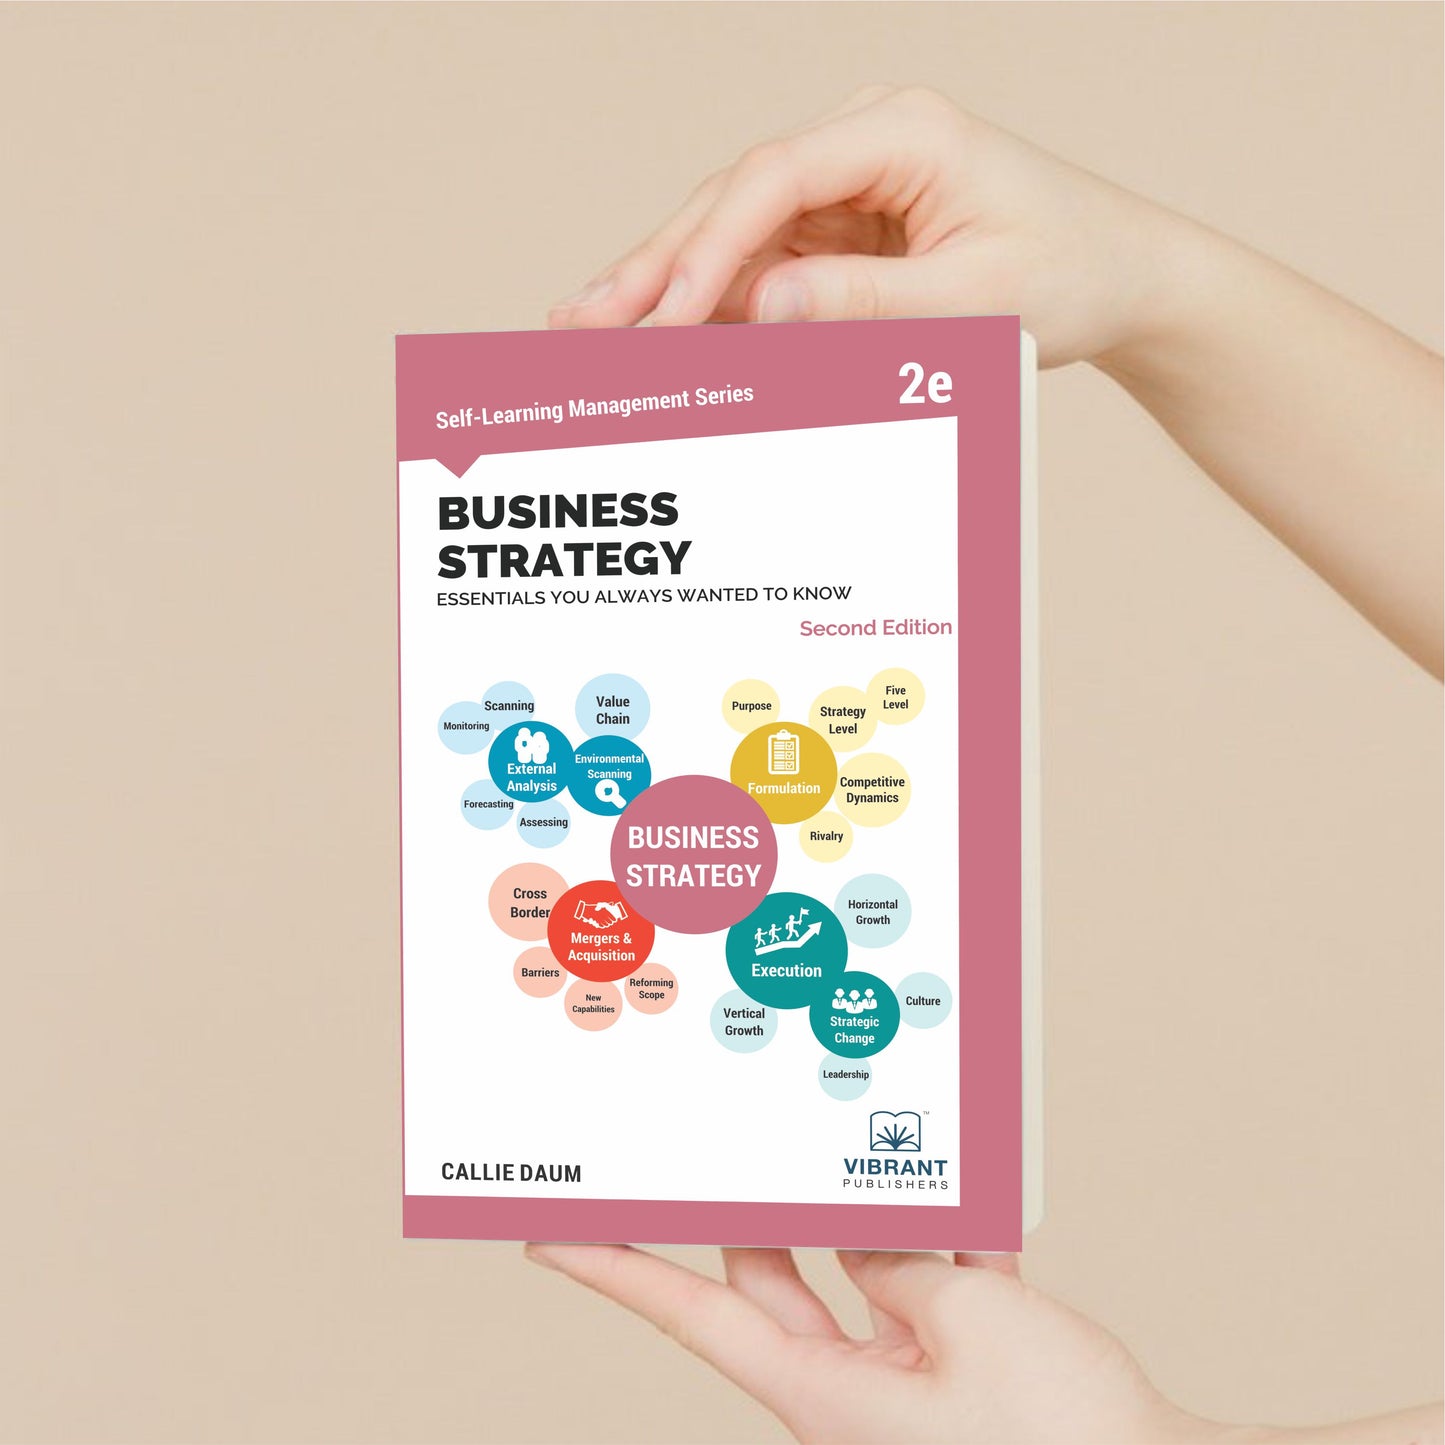 Business Strategy Essentials You Always Wanted To Know